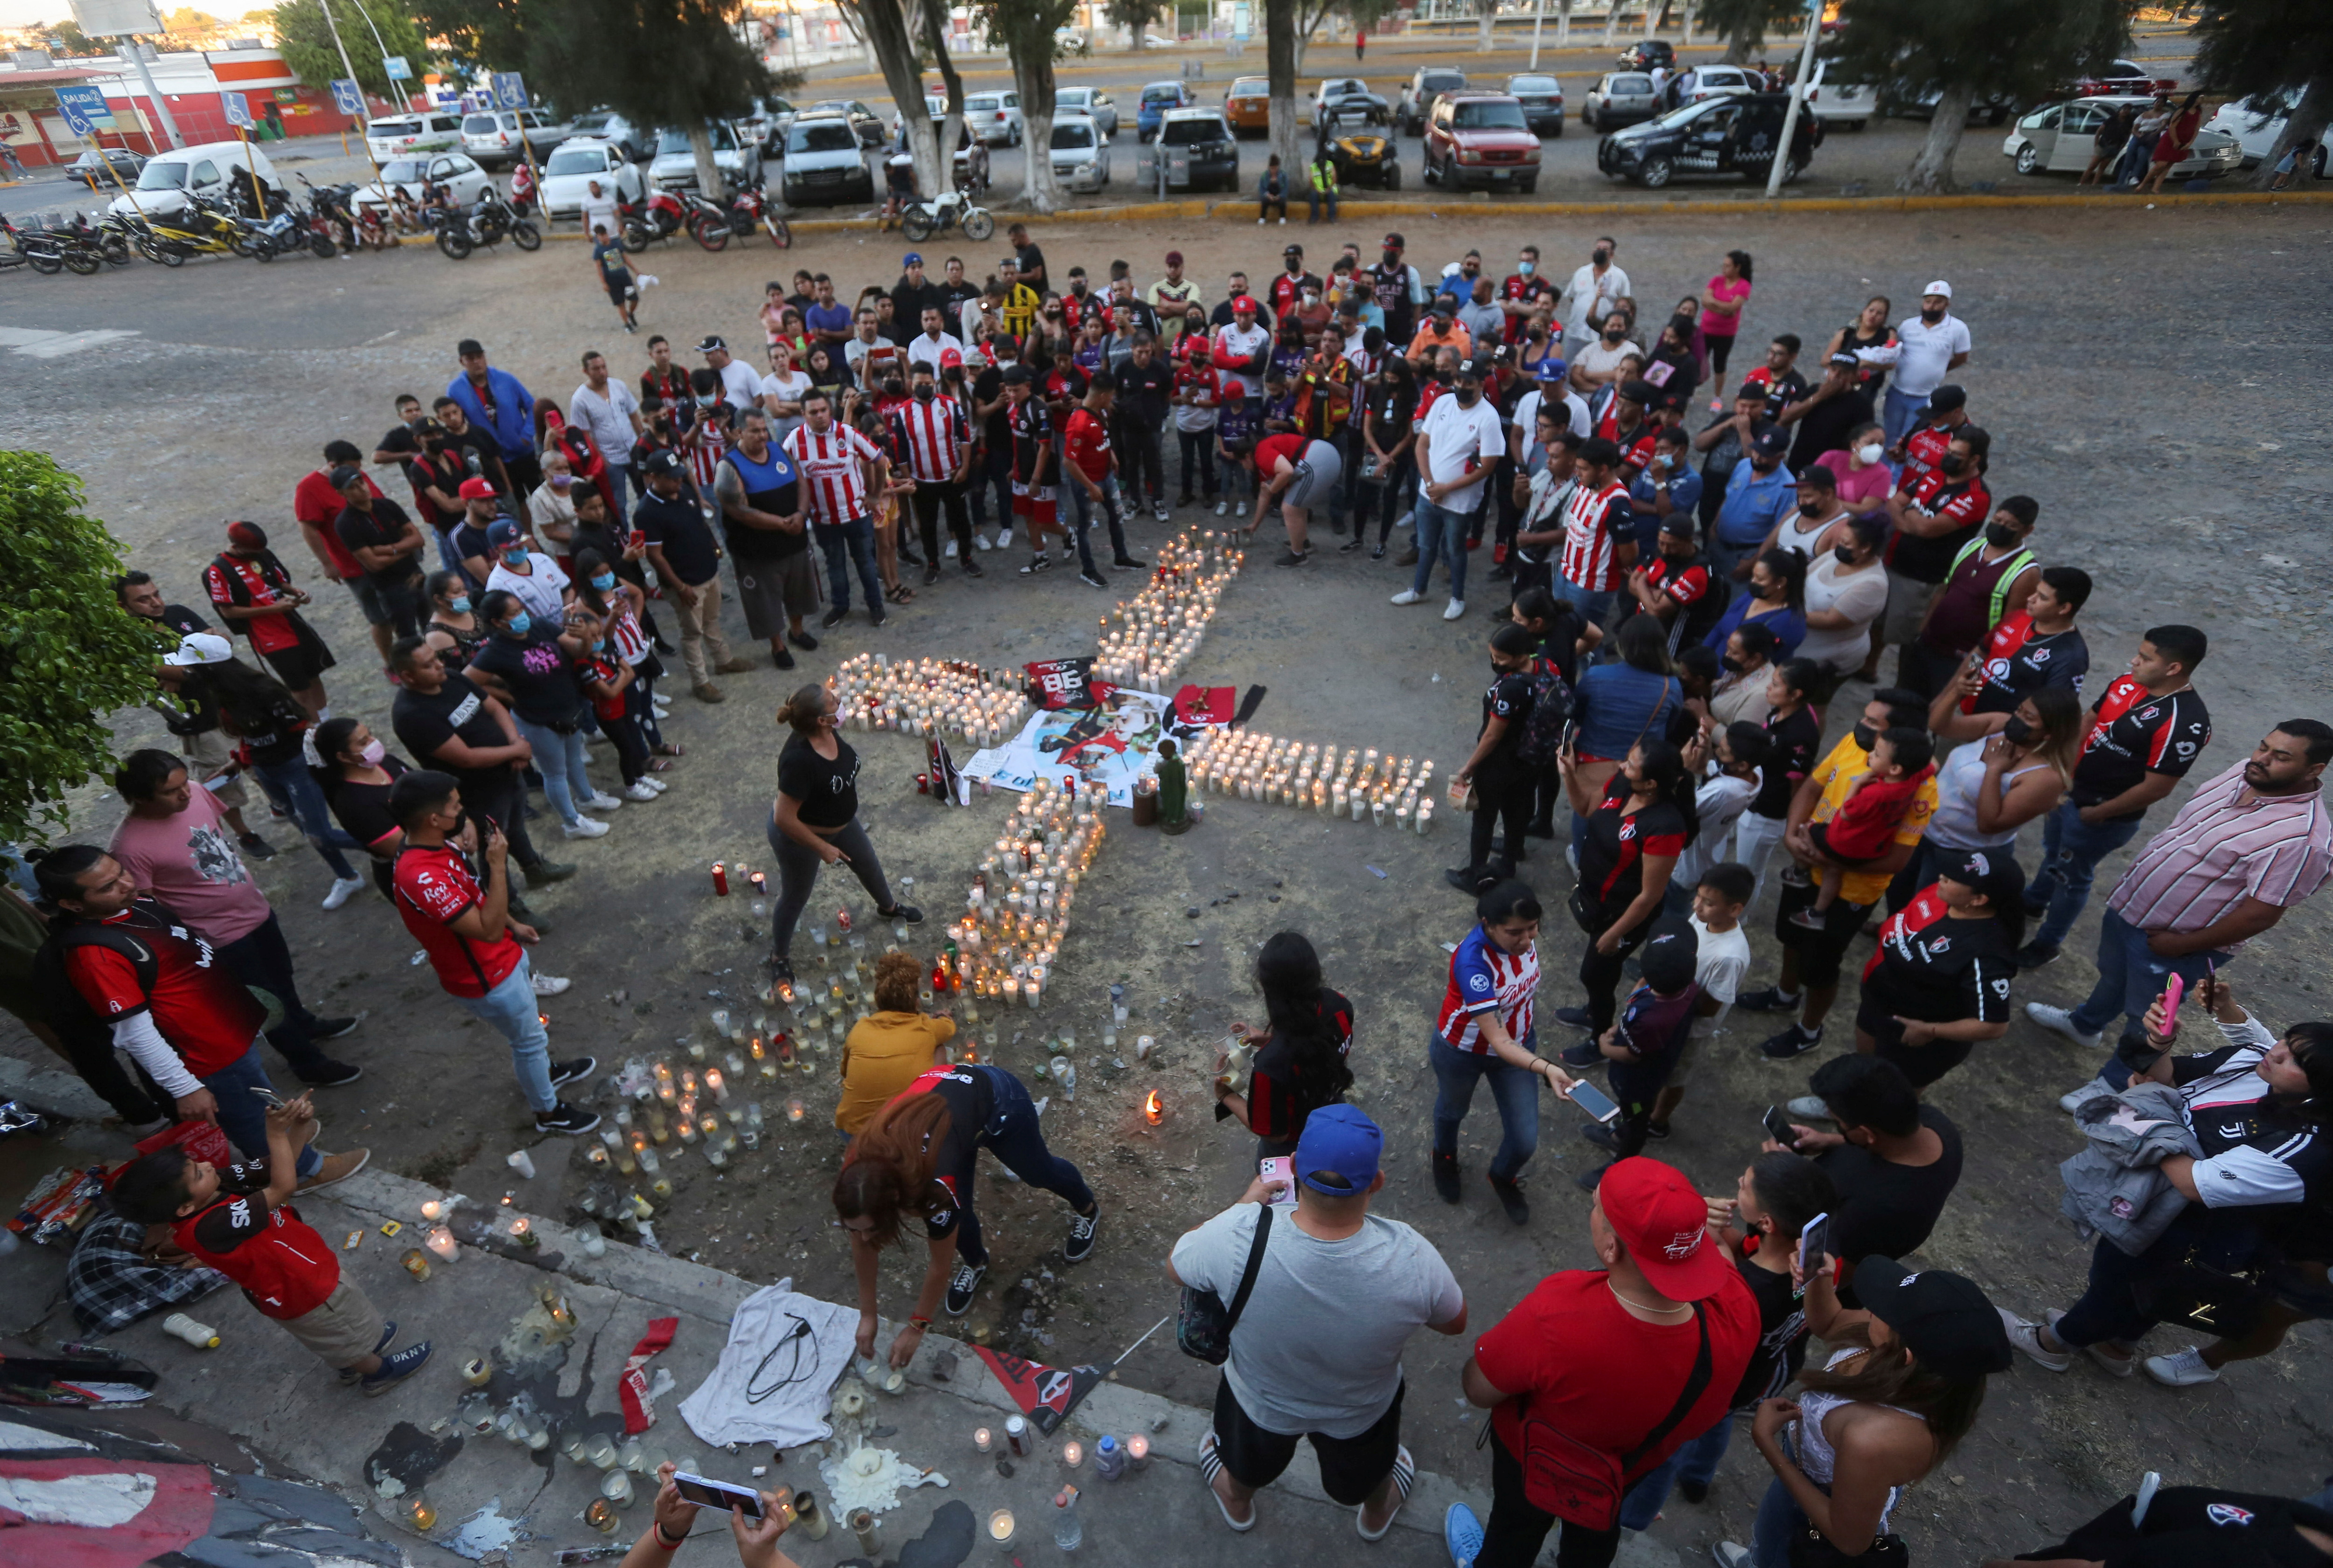 Fans brawl at Mexican soccer match leaves several in critical condition